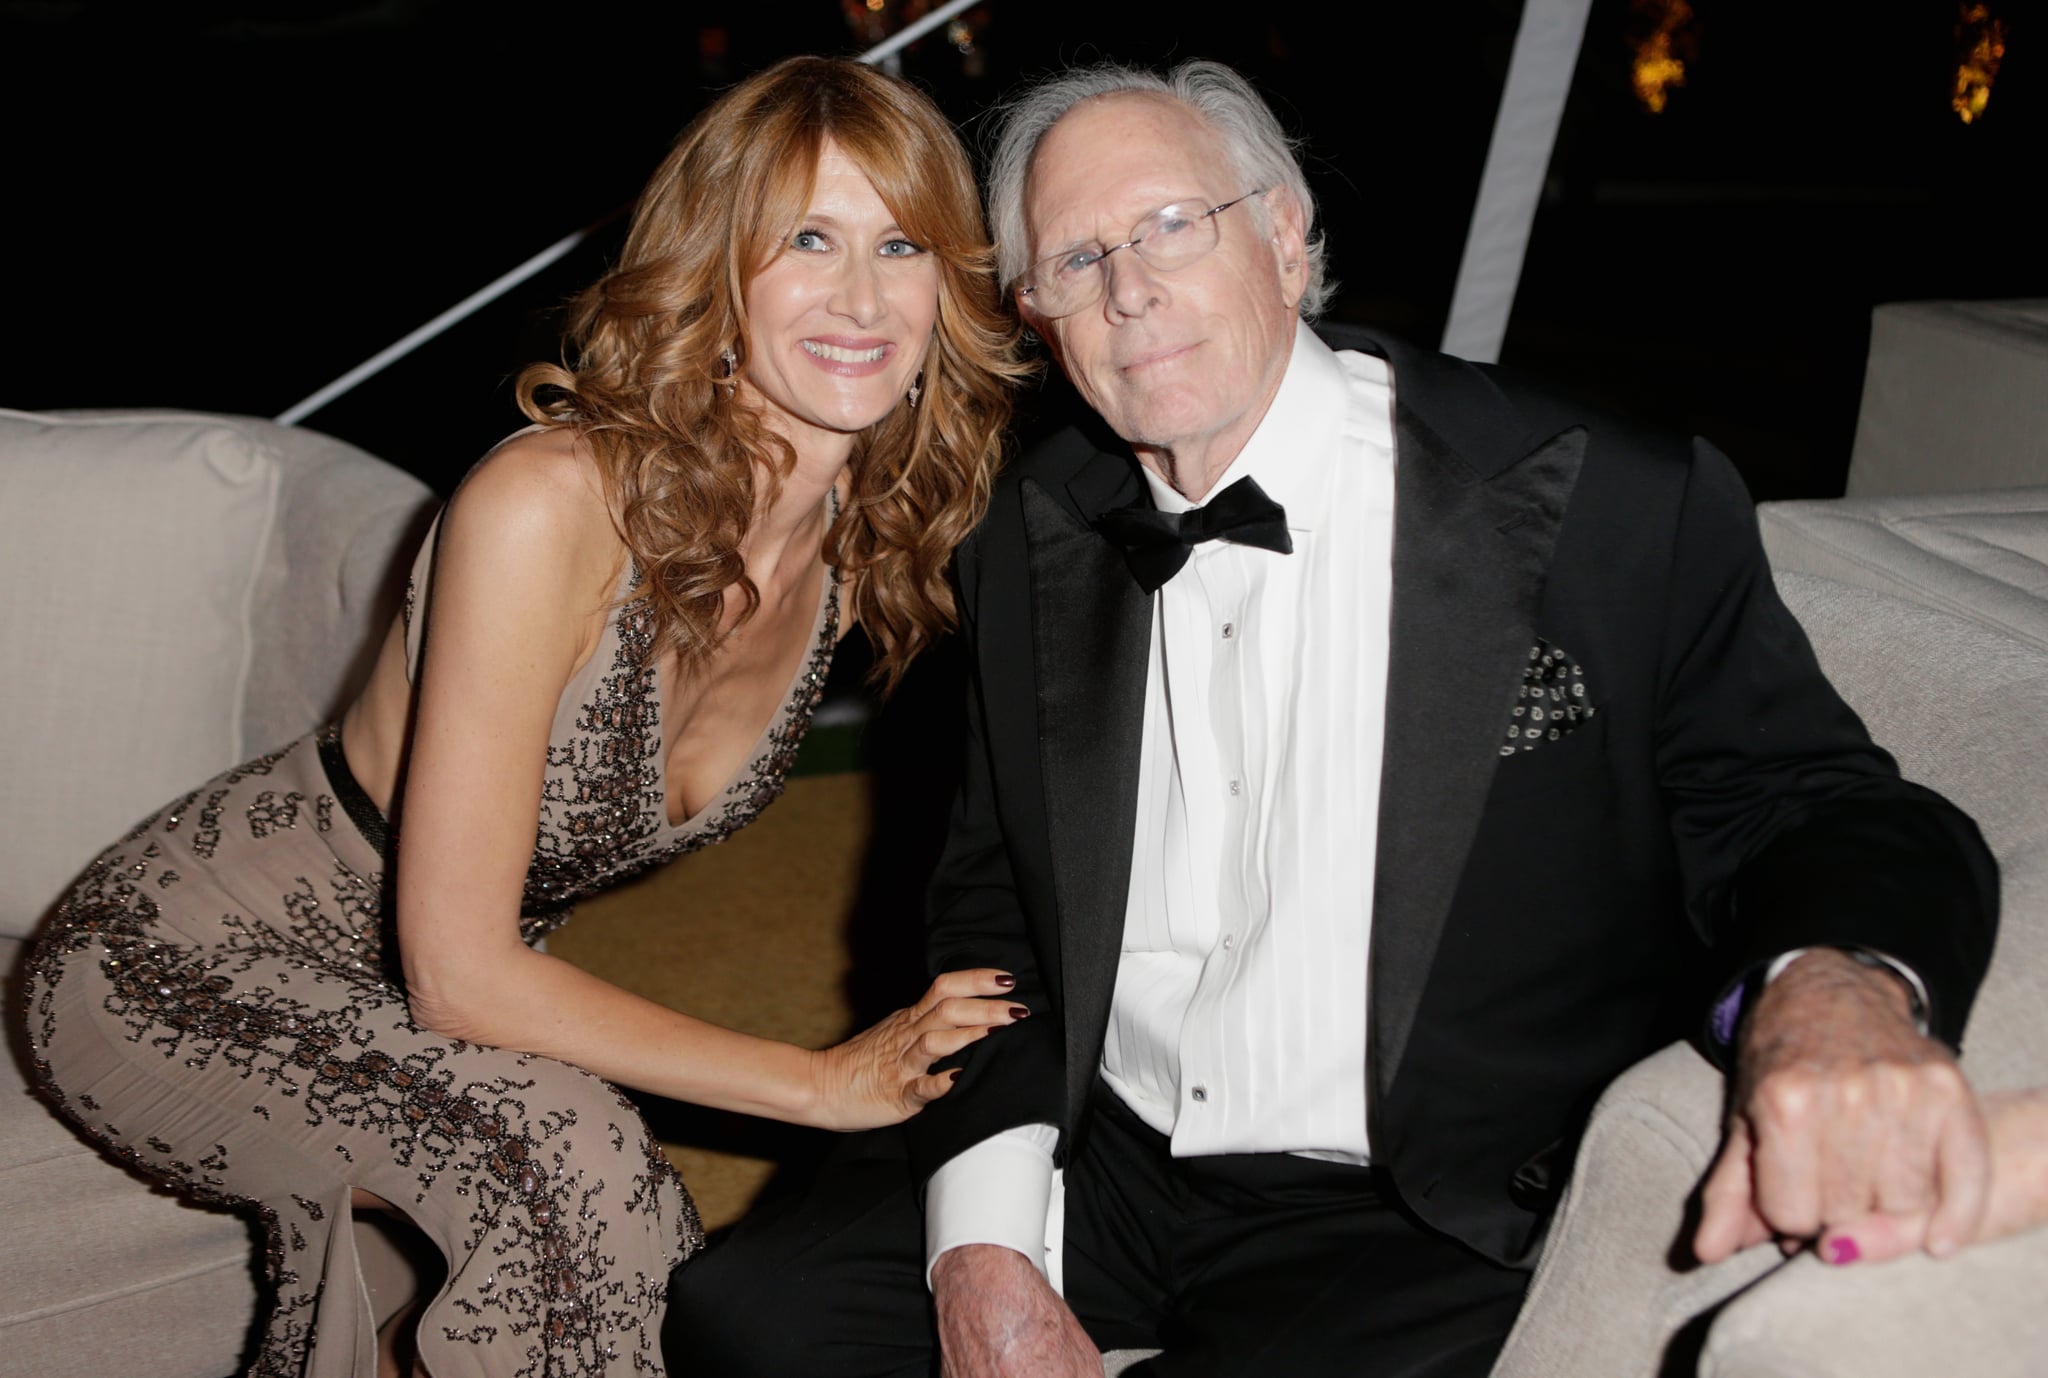 Laura Dern and her dad, Bruce, hung out inside. It's Party Time